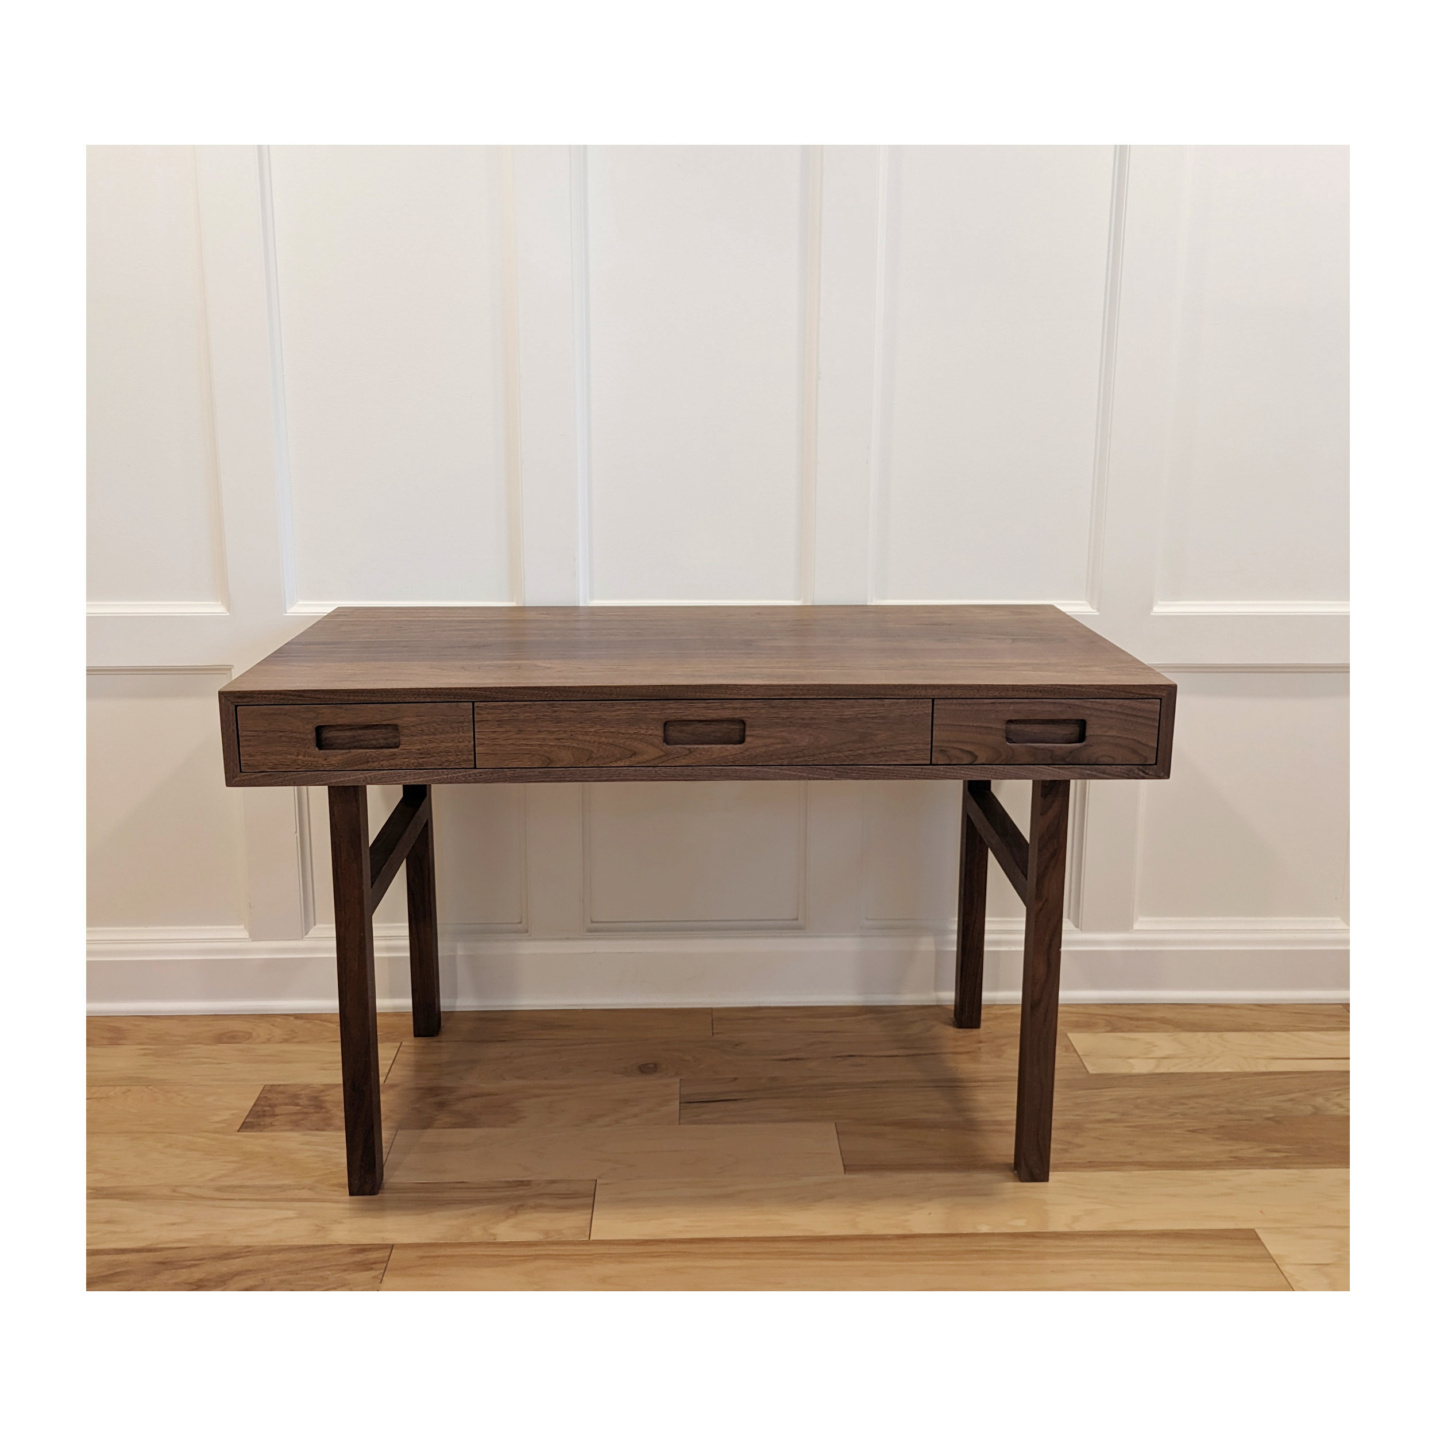 Walnut desk in a smaller size with three drawers